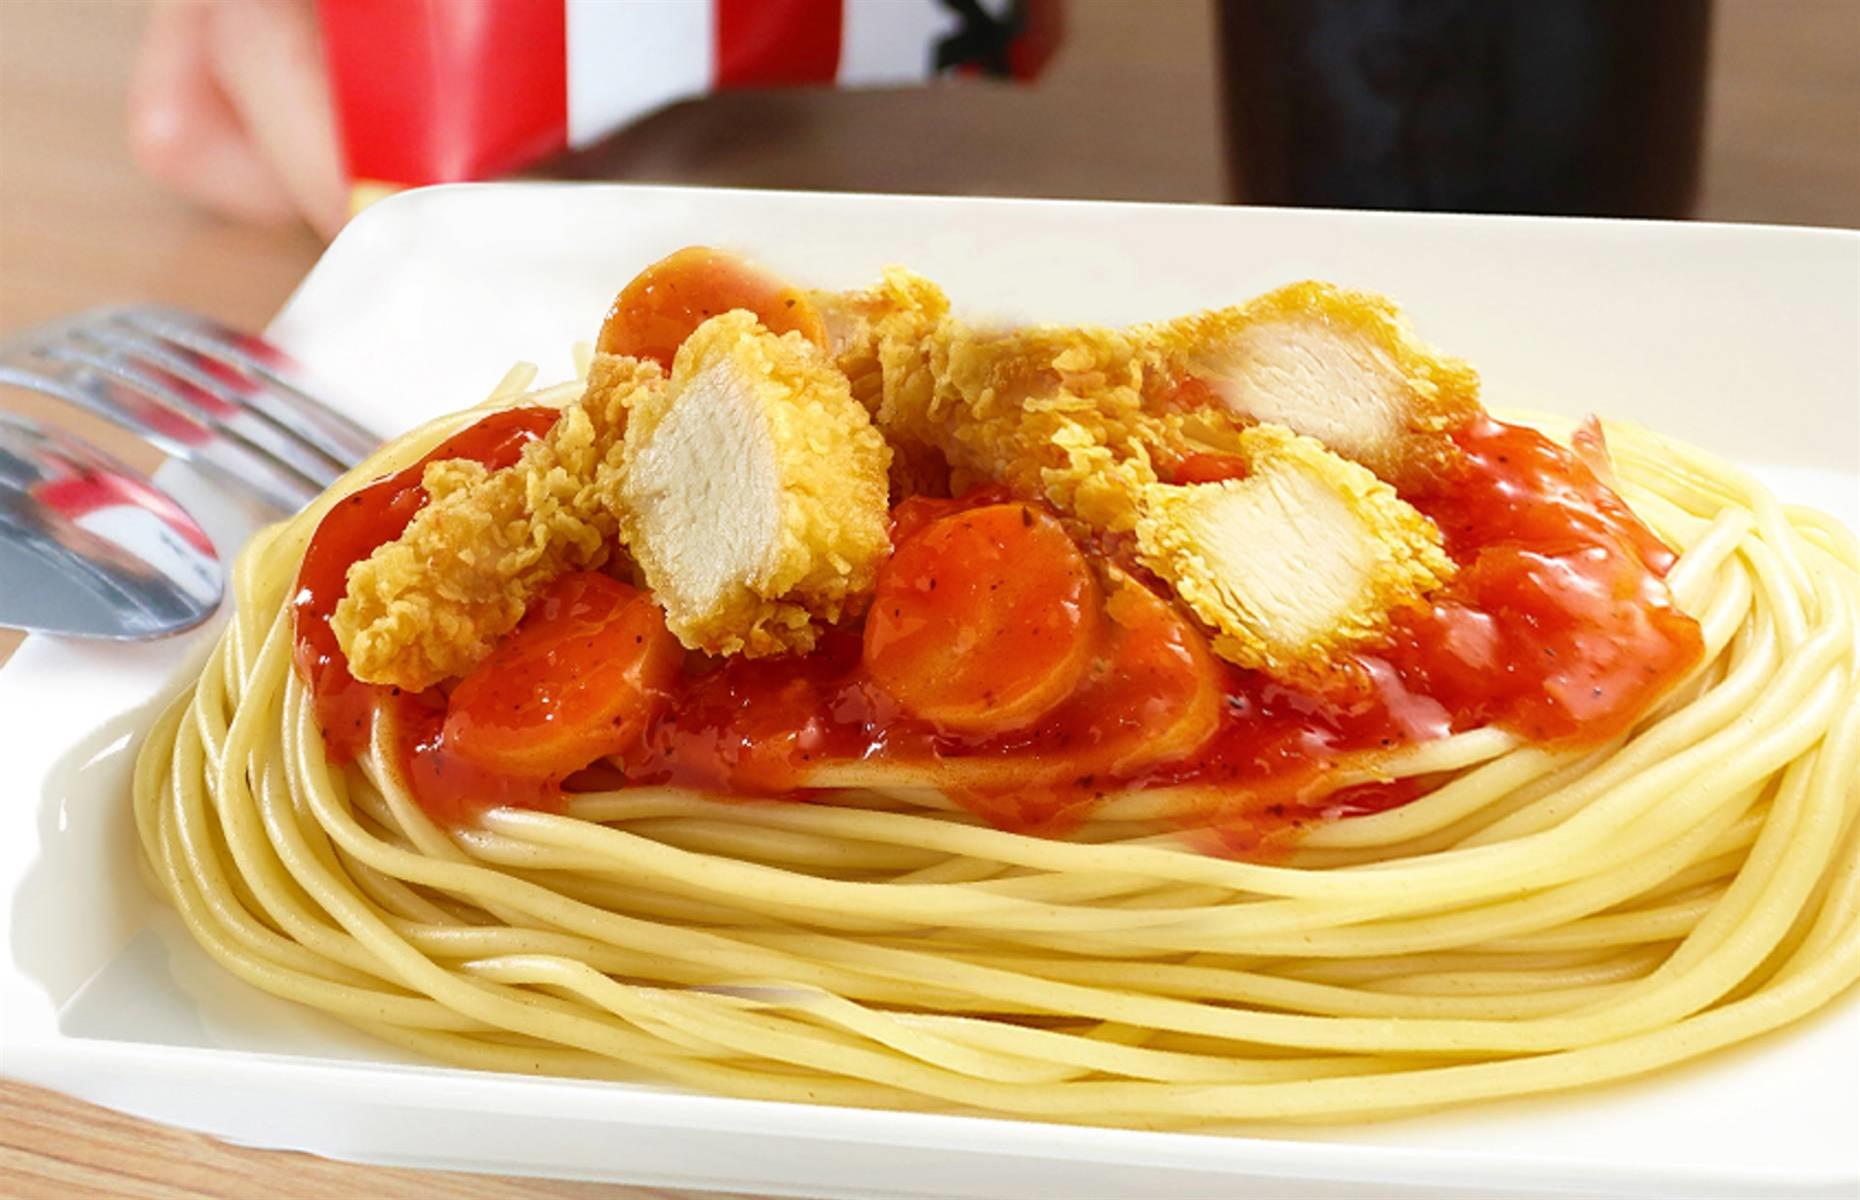 <p>In Vietnam, KFC restaurants serve spaghetti topped with tomato sauce, grated cheese and (of course) the famous fried chicken. A permanent item on the menu, you can get a portion of Pachito Pasta at any time of day, all year-round. Although its lack of authenticity may upset pasta purists, we'd happily give it a try.</p>  <p><strong>Liking this? Click on the Follow button above for more great stories from loveFOOD</strong></p>